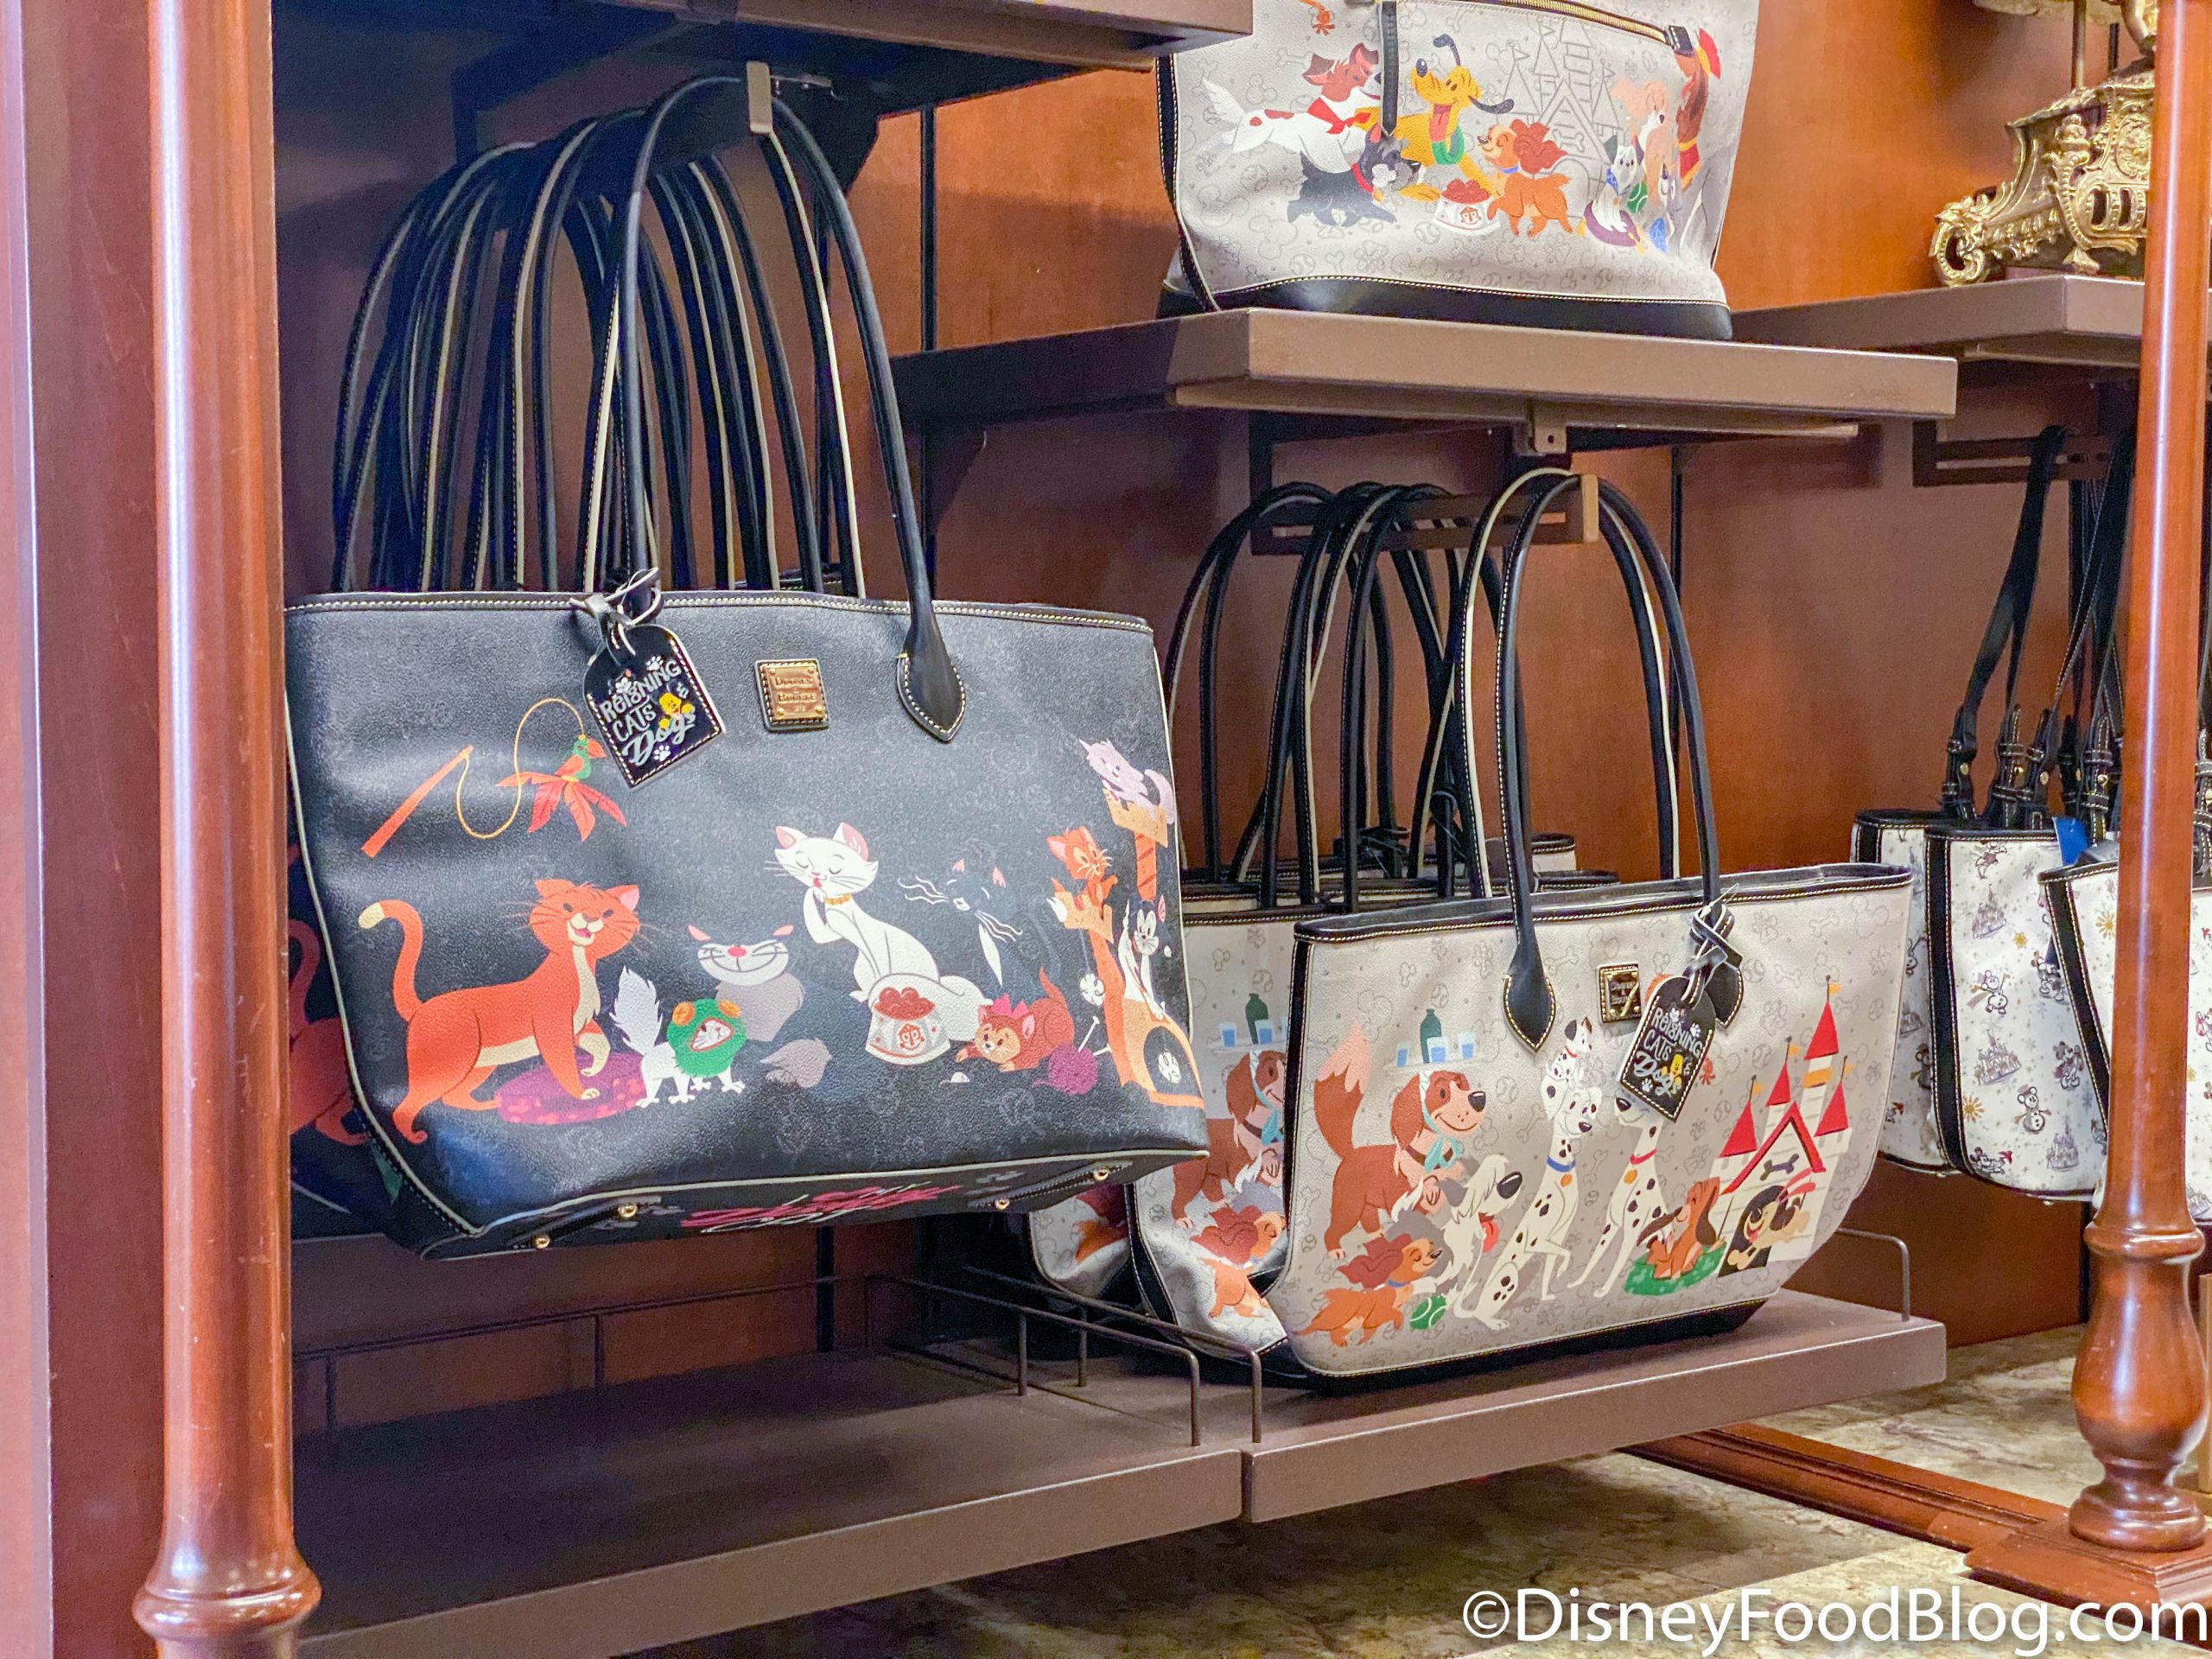 PHOTOS: The NEW Dooney & Bourke Dog and Cat Bags Are NOW Available in Disney  World and Online!